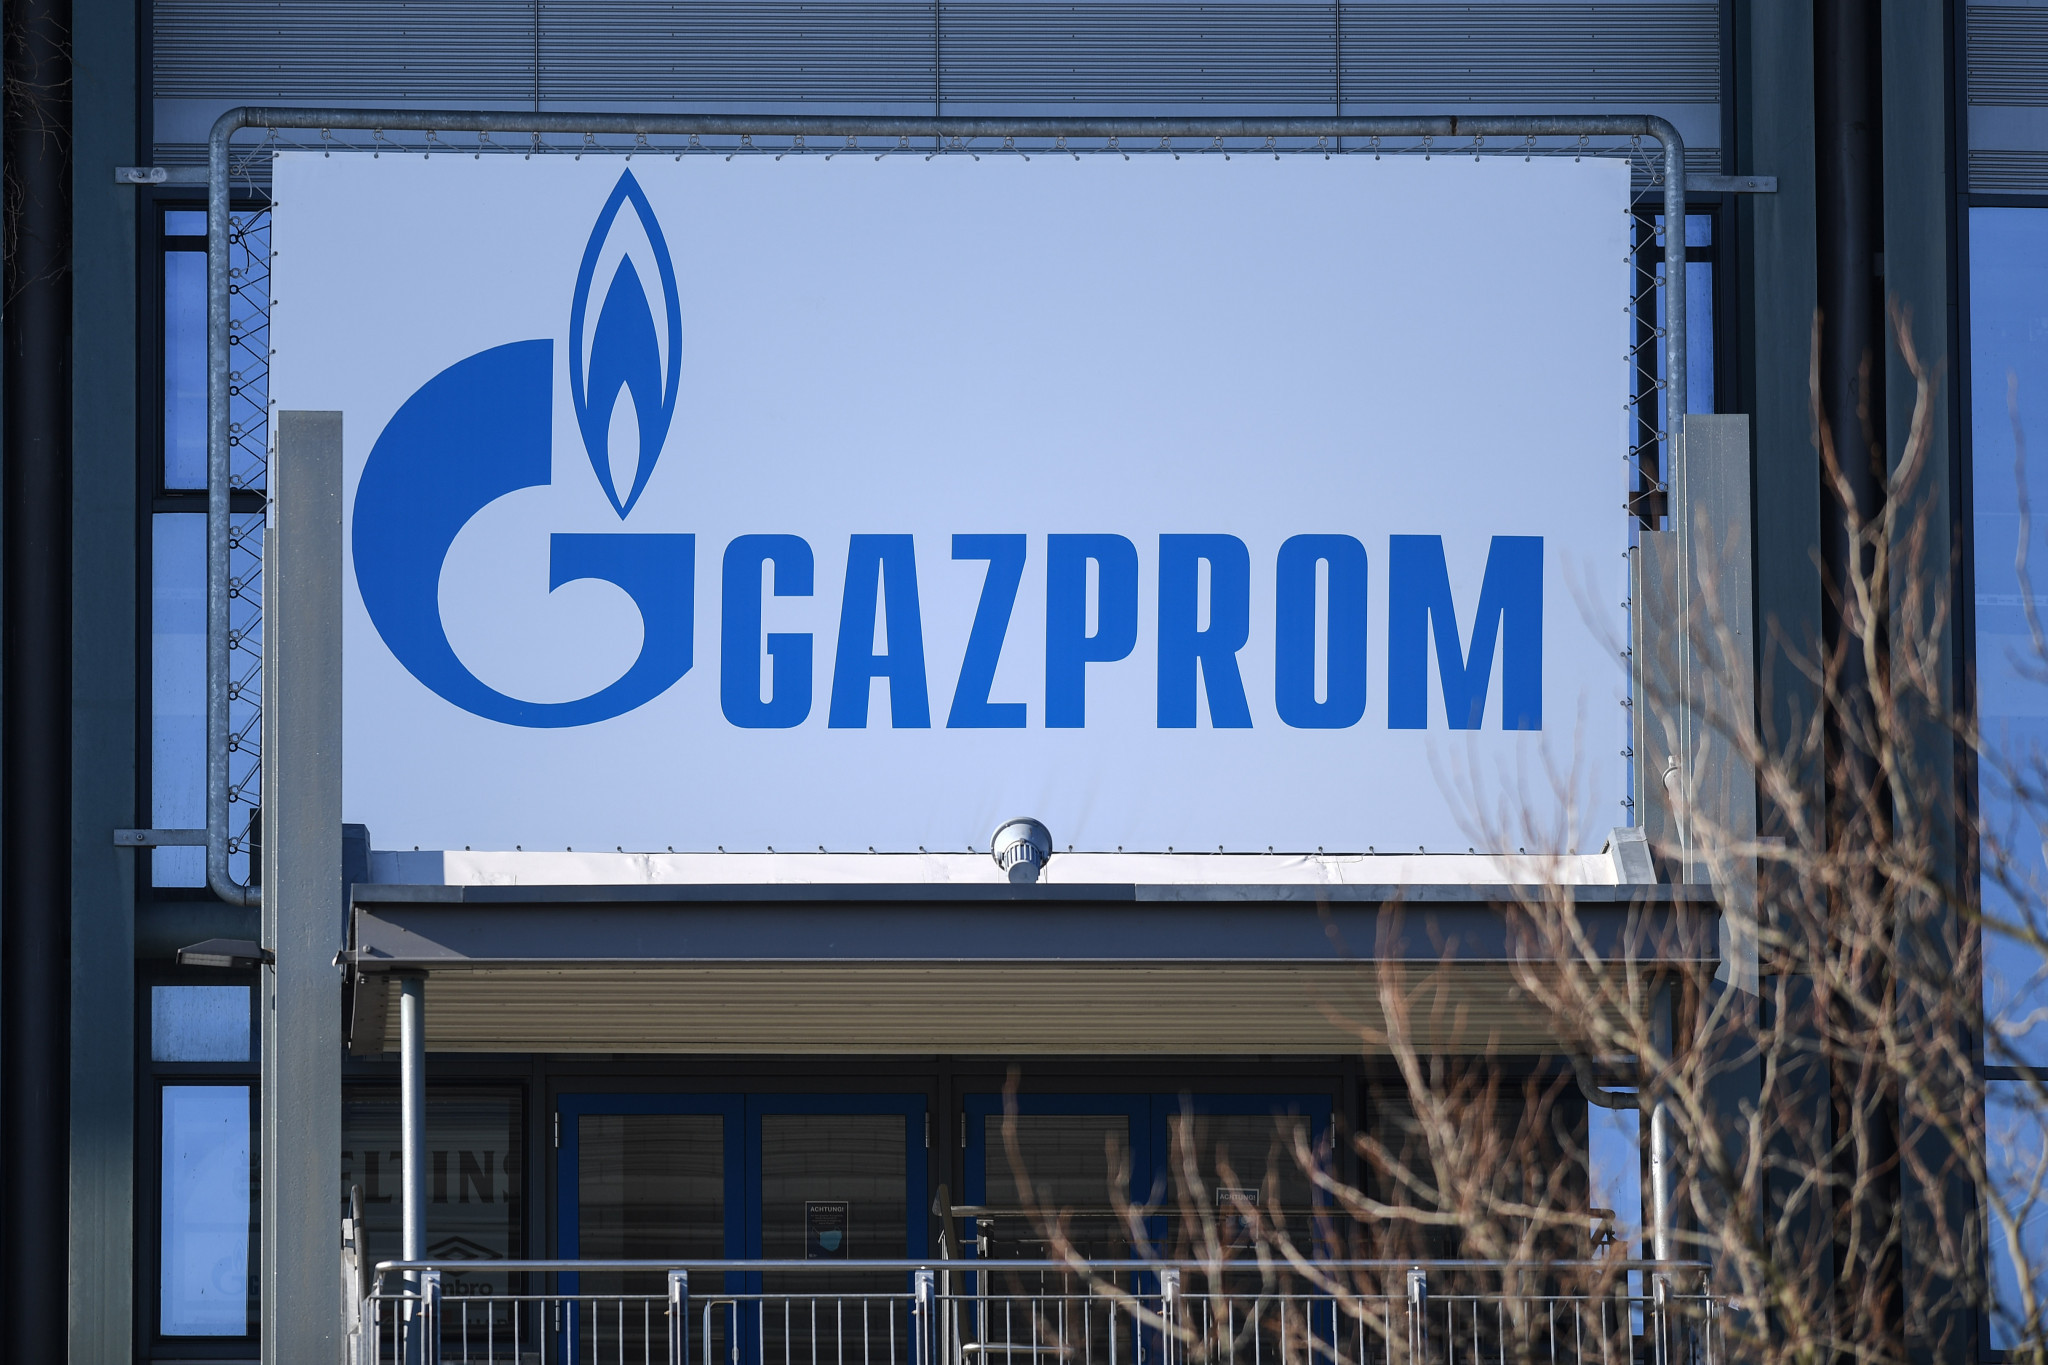 Gazprom remains as the general partner of the IBA despite the Russian invasion of Ukraine ©Getty Images